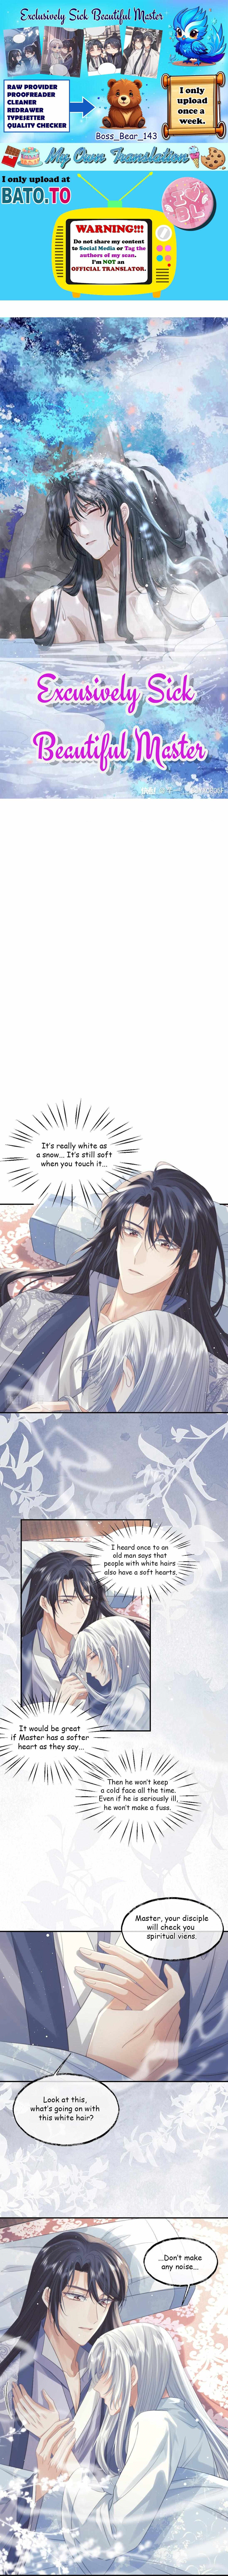 EXCLUSIVELY SICK BEAUTIFUL MASTER - chapter 15 - #2